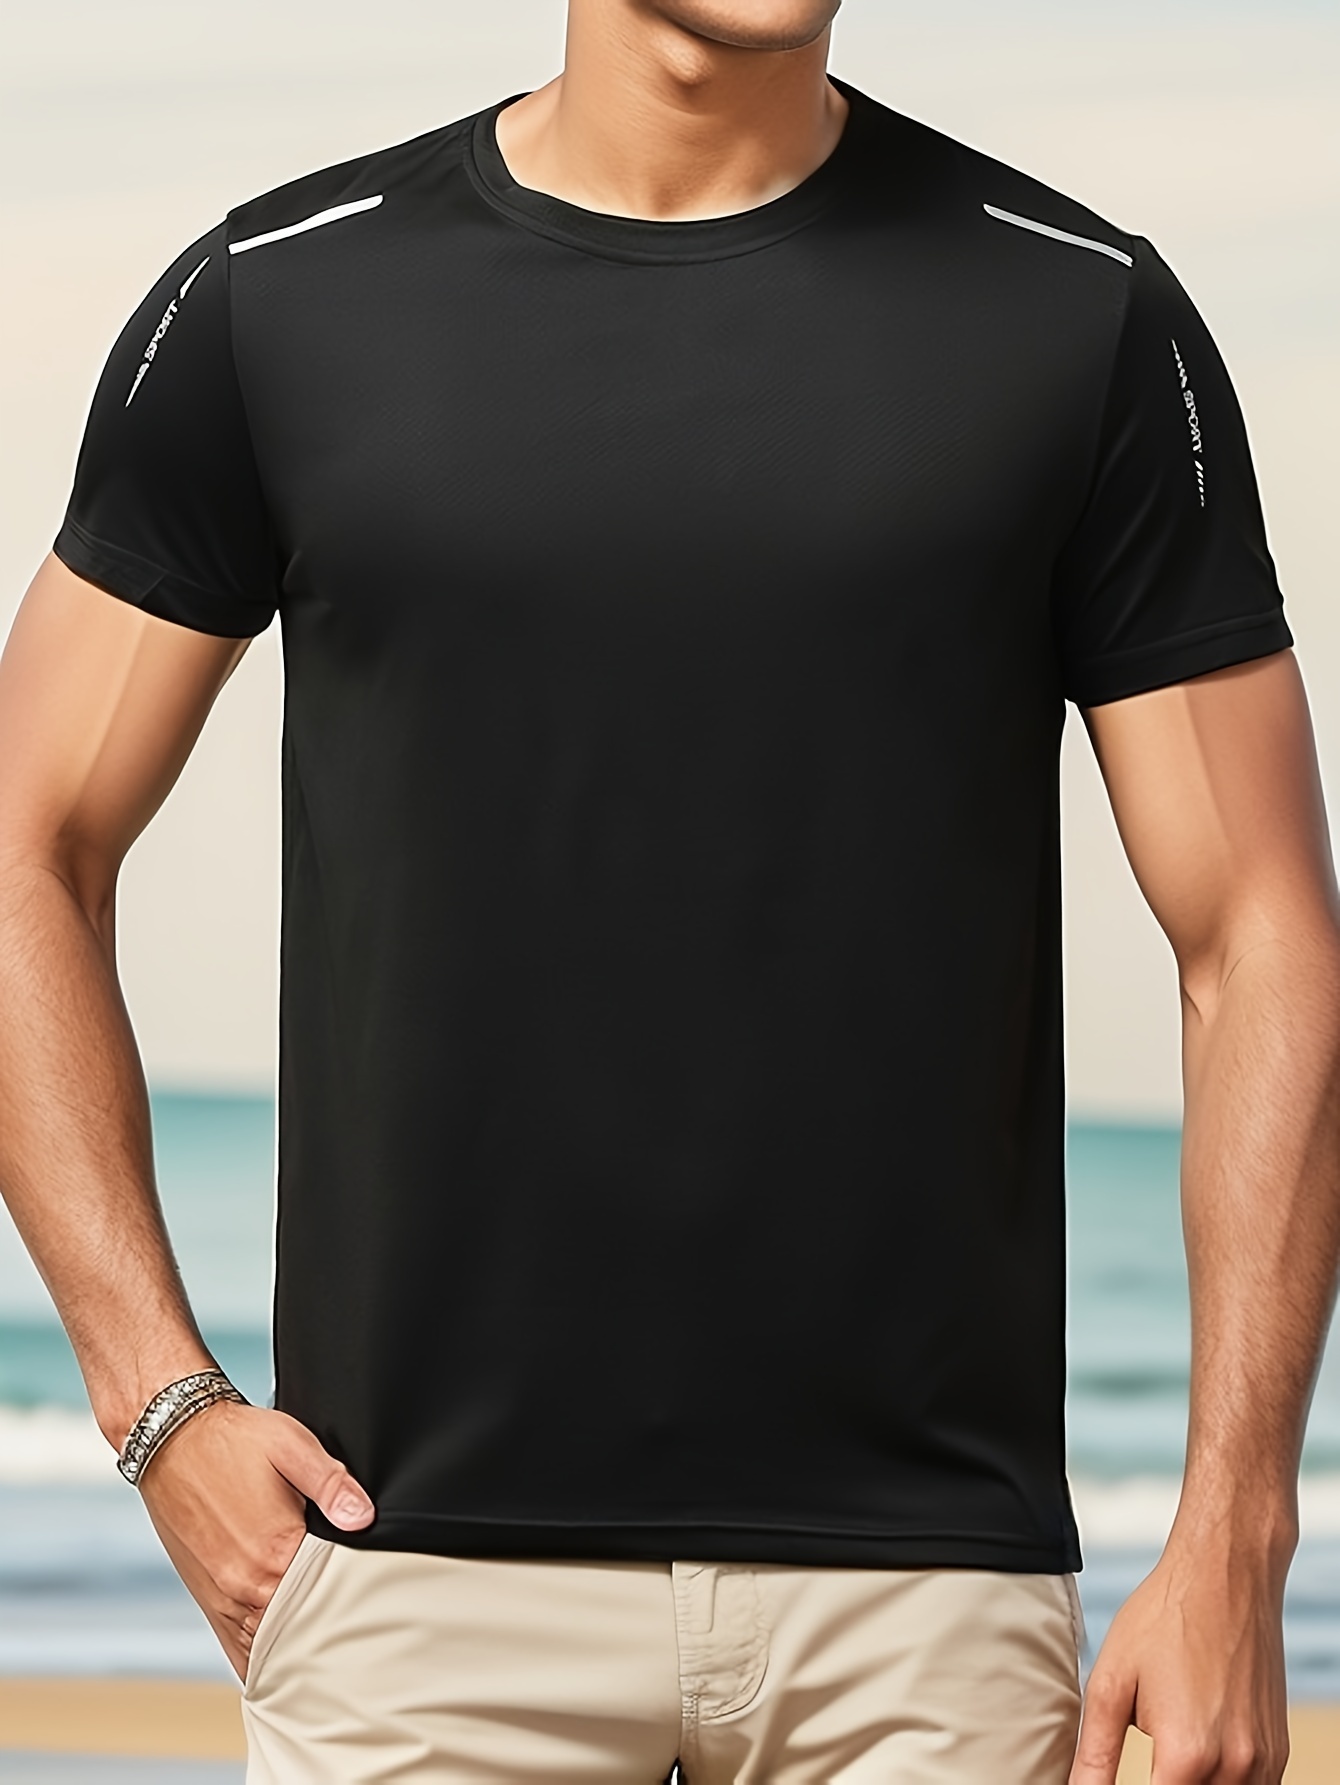 Aayomet Cotton Spandex T Shirt Mens Spring Summer Casual